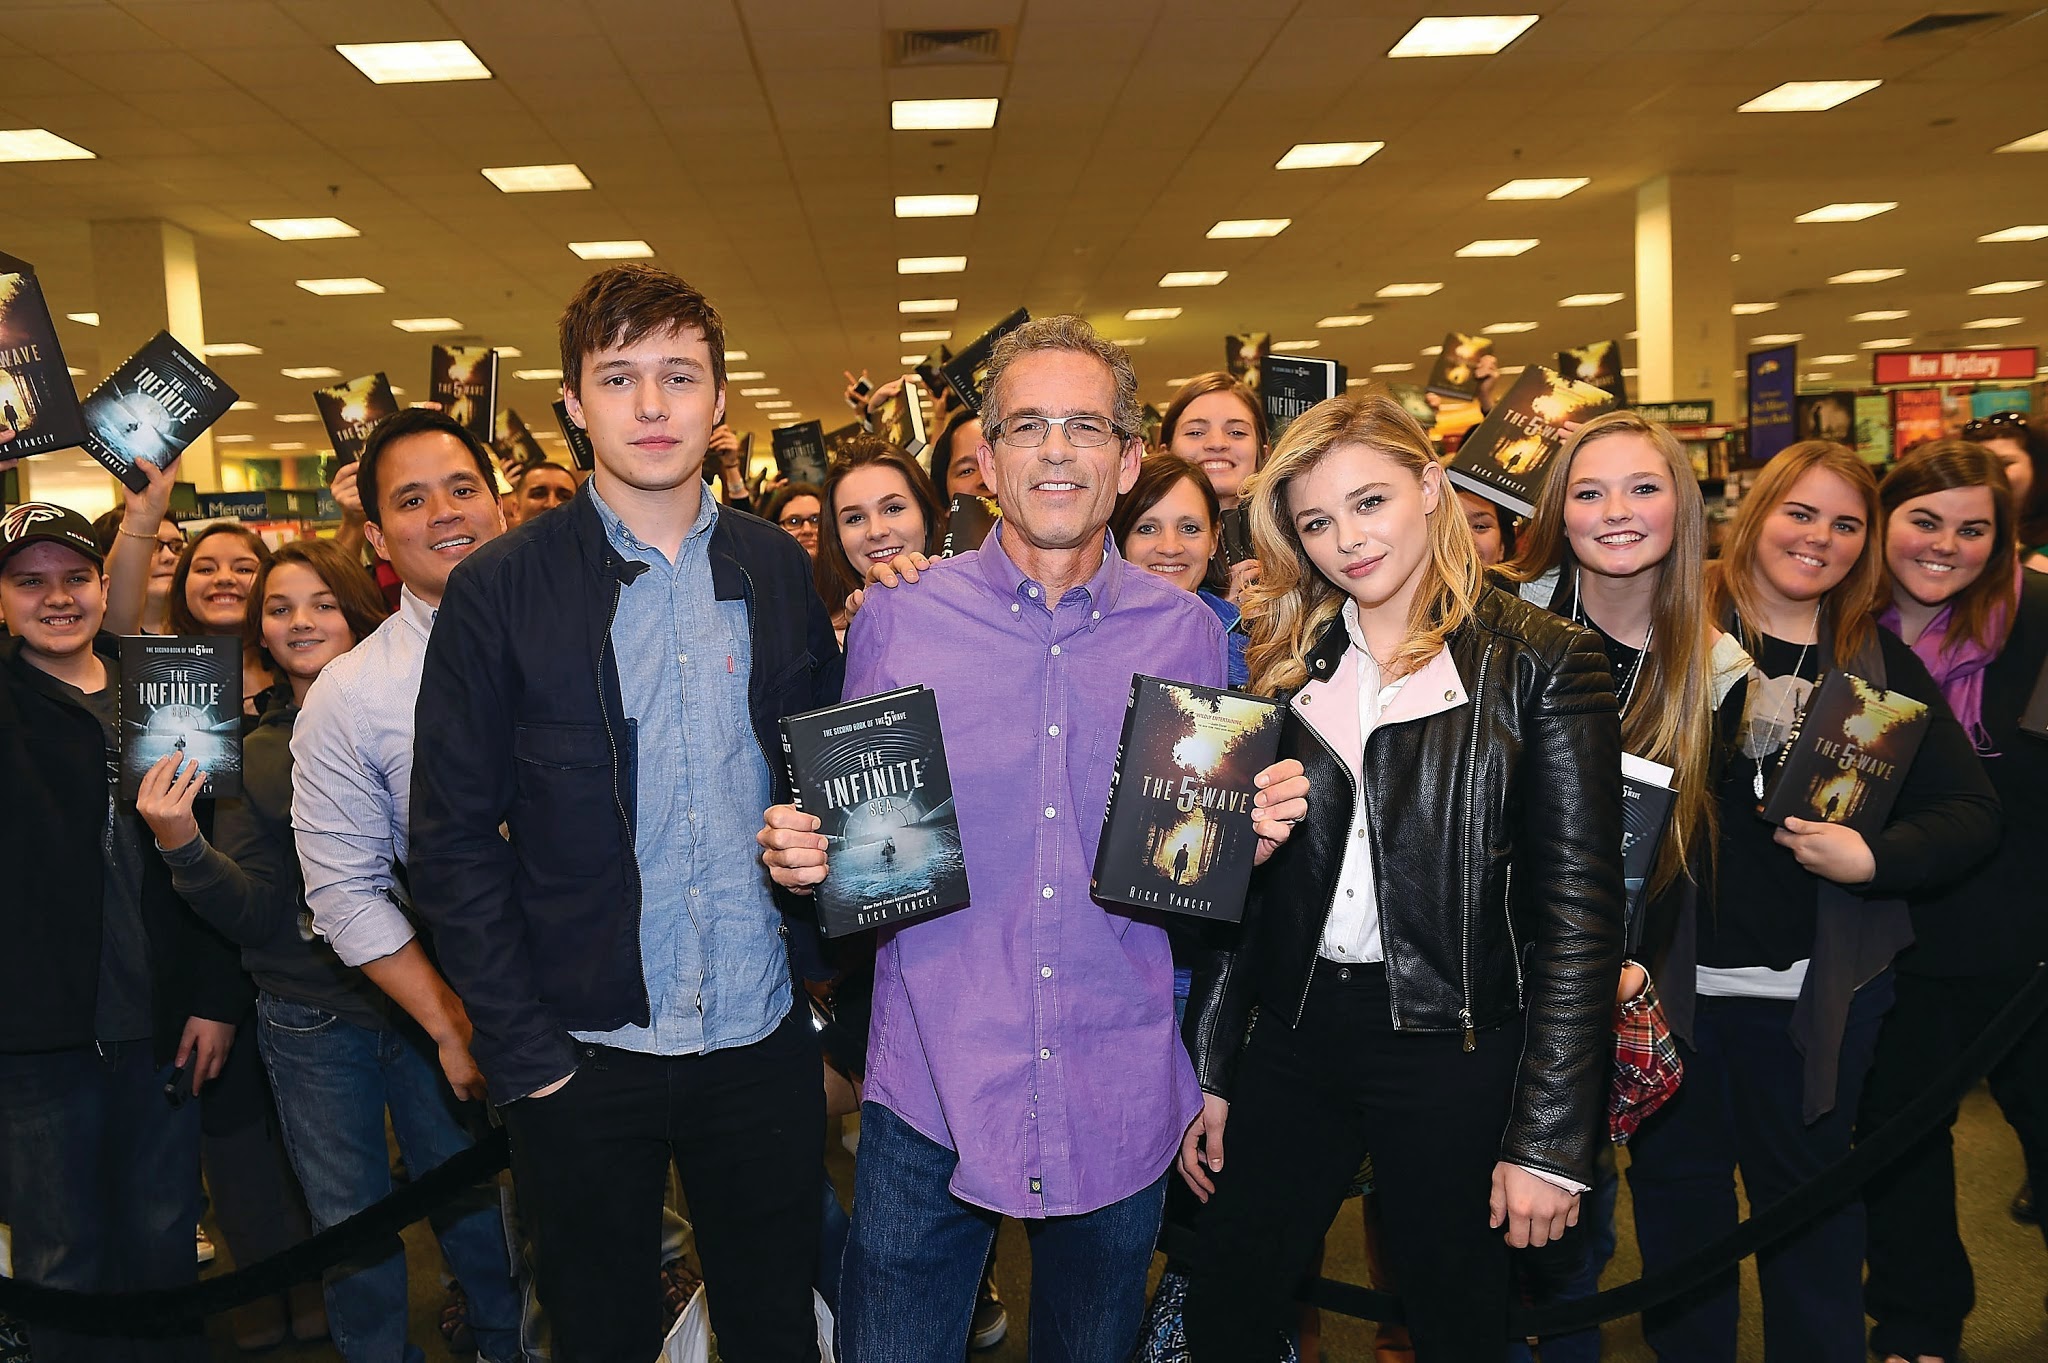 Rick Yancey, Chloe Grace Moretz & Nick Robinson Discuss The Book & New Movie "The 5th Wave"